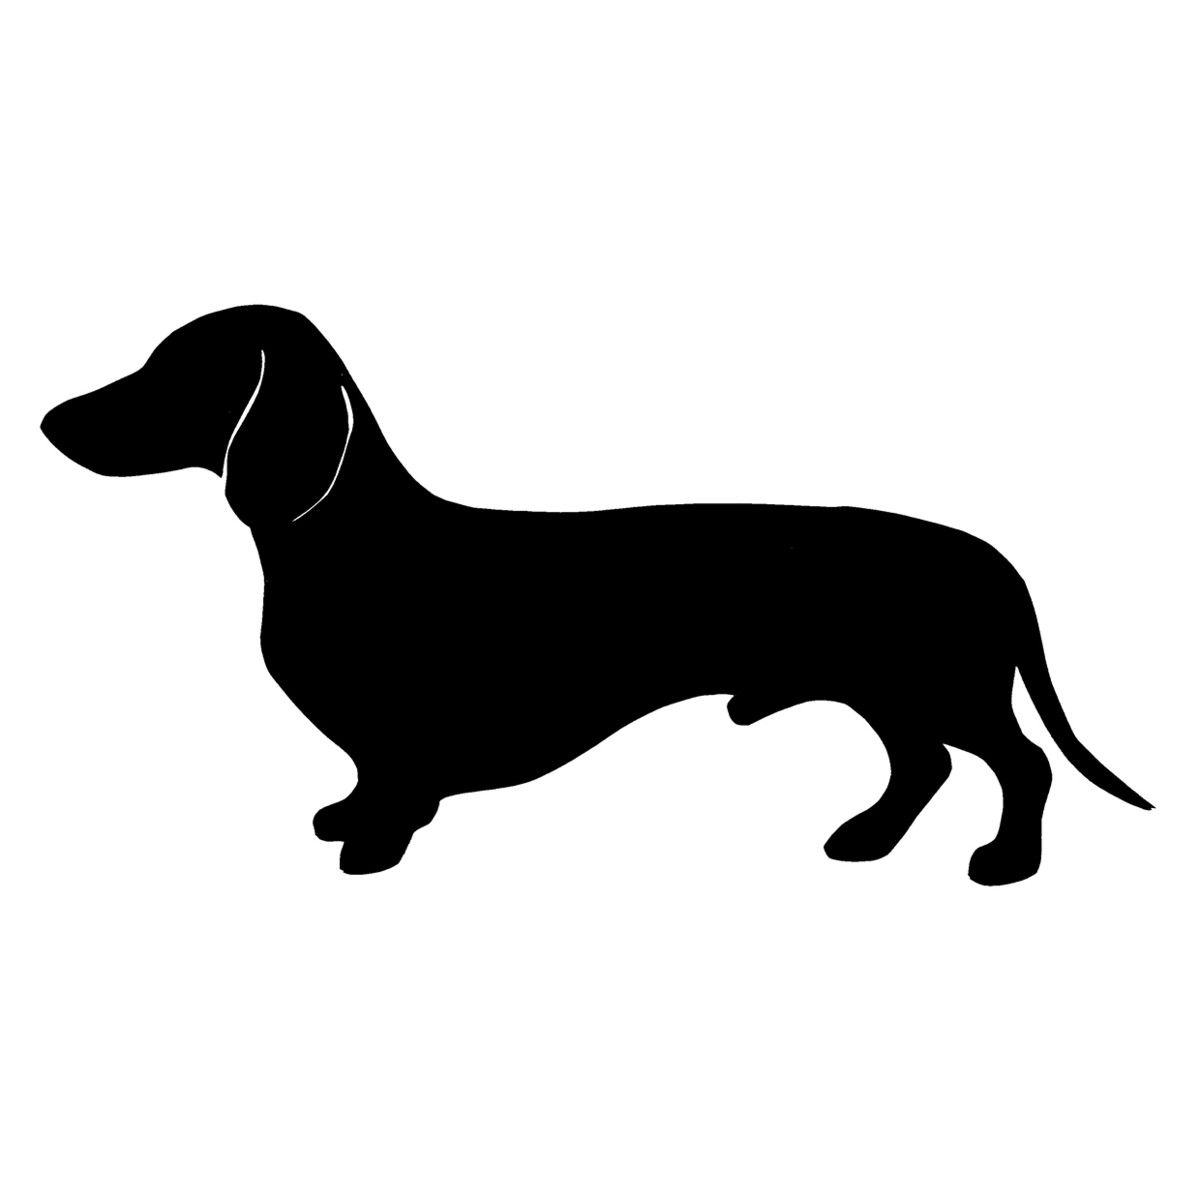 Dachshund Silhouette Template At GetDrawings Free Download